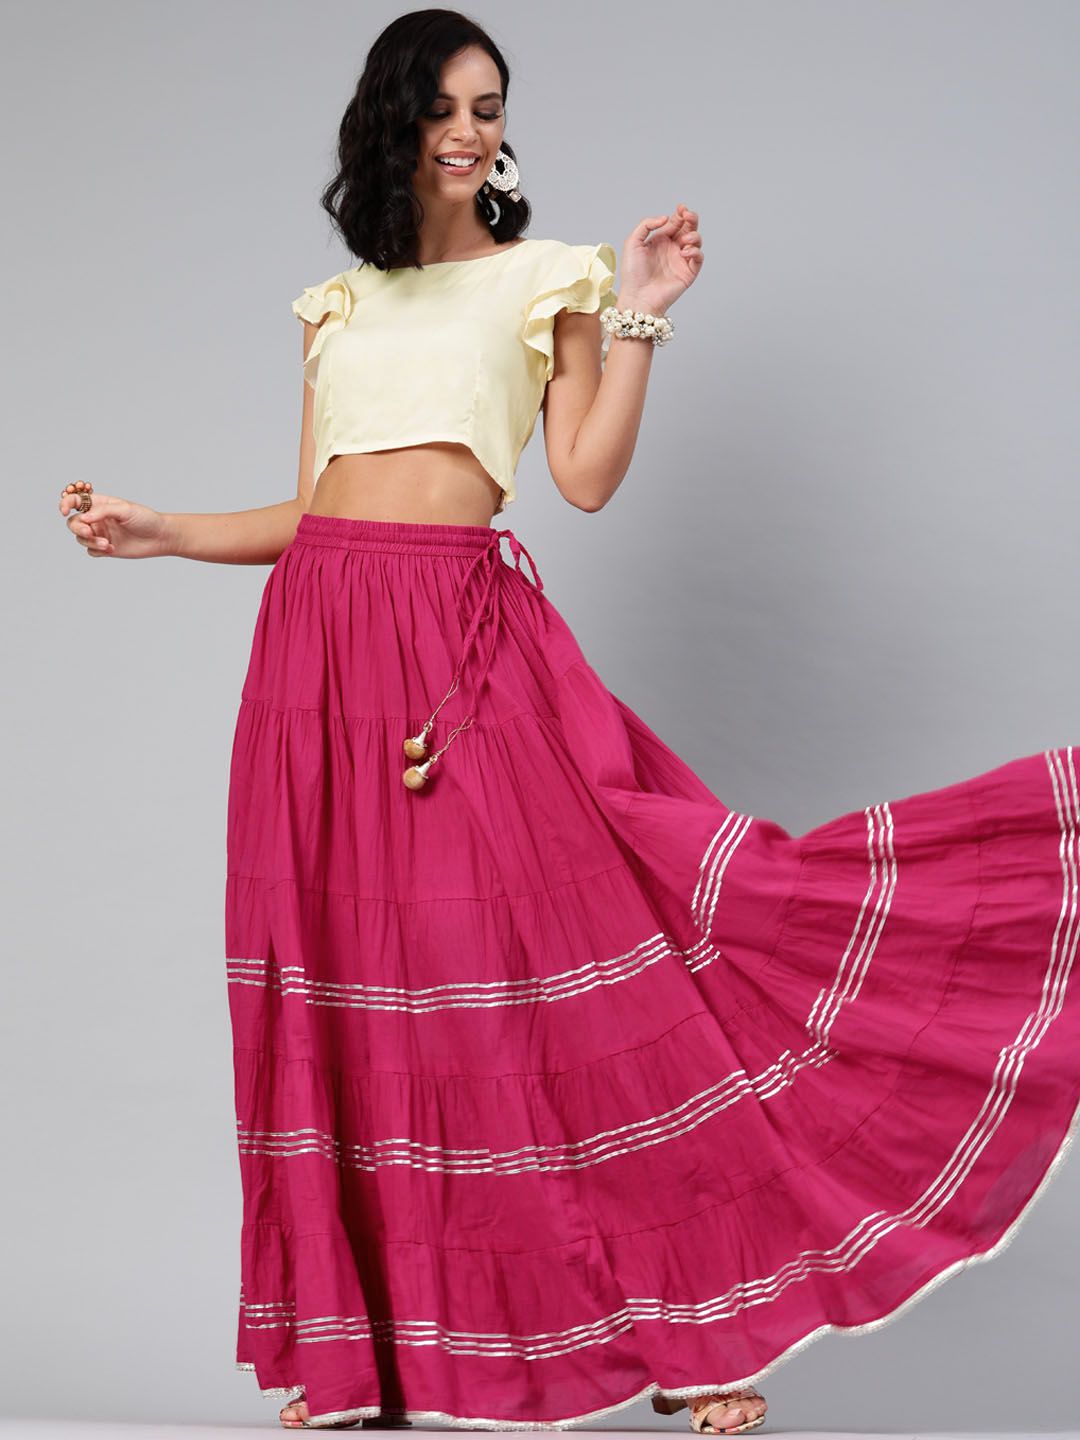 Geroo Jaipur Hand Crafted flared Pink Pure Cotton Skirt with White Crop Top Price in India